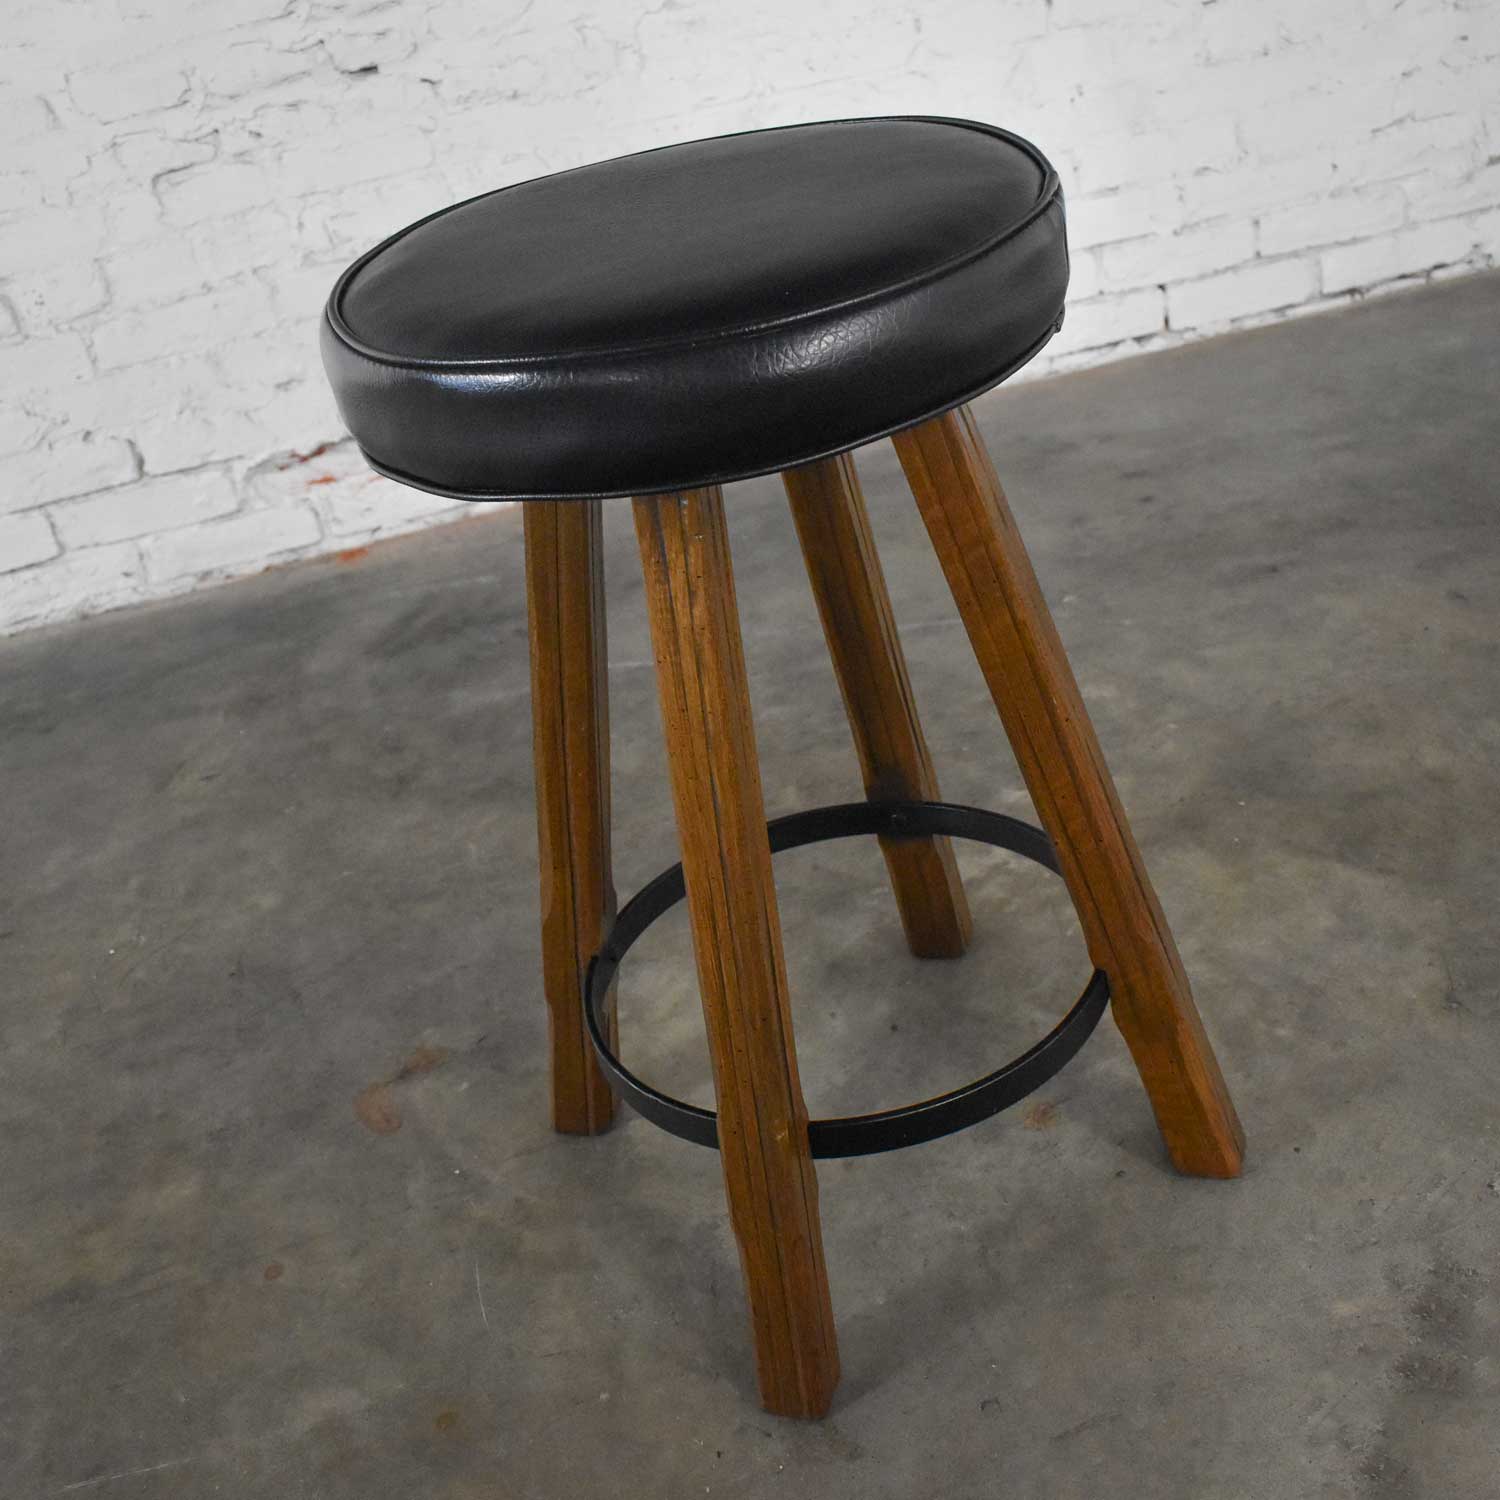 Brandt Ranch Oak Bar Stool Acorn Brown Finish and Black-Brown Vinyl Faux Leather Seat